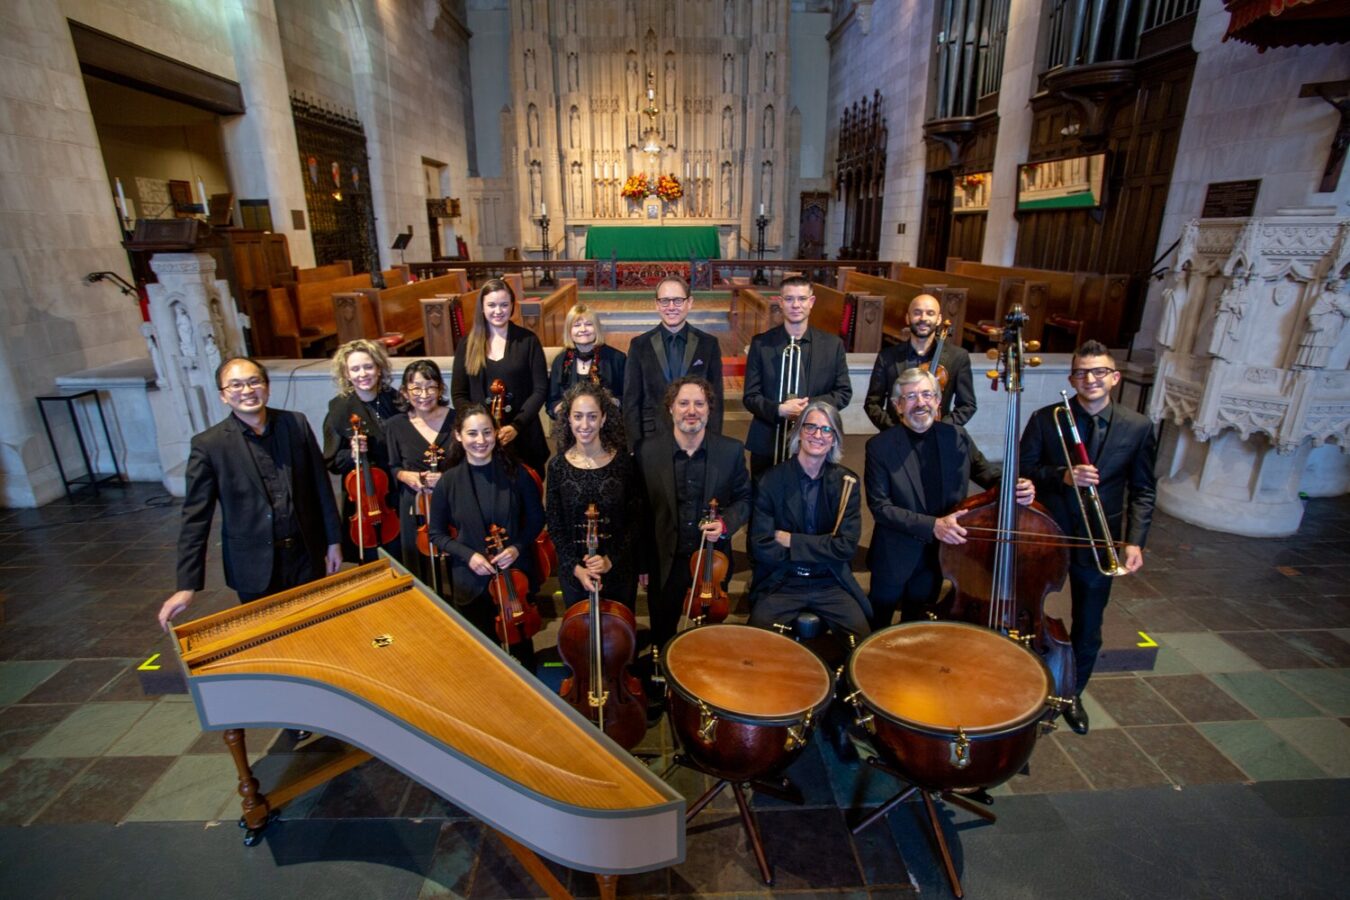 Ensemble Bella Voce Sinfonia poses in St. Luke’s Episcopal Church with their instruments.